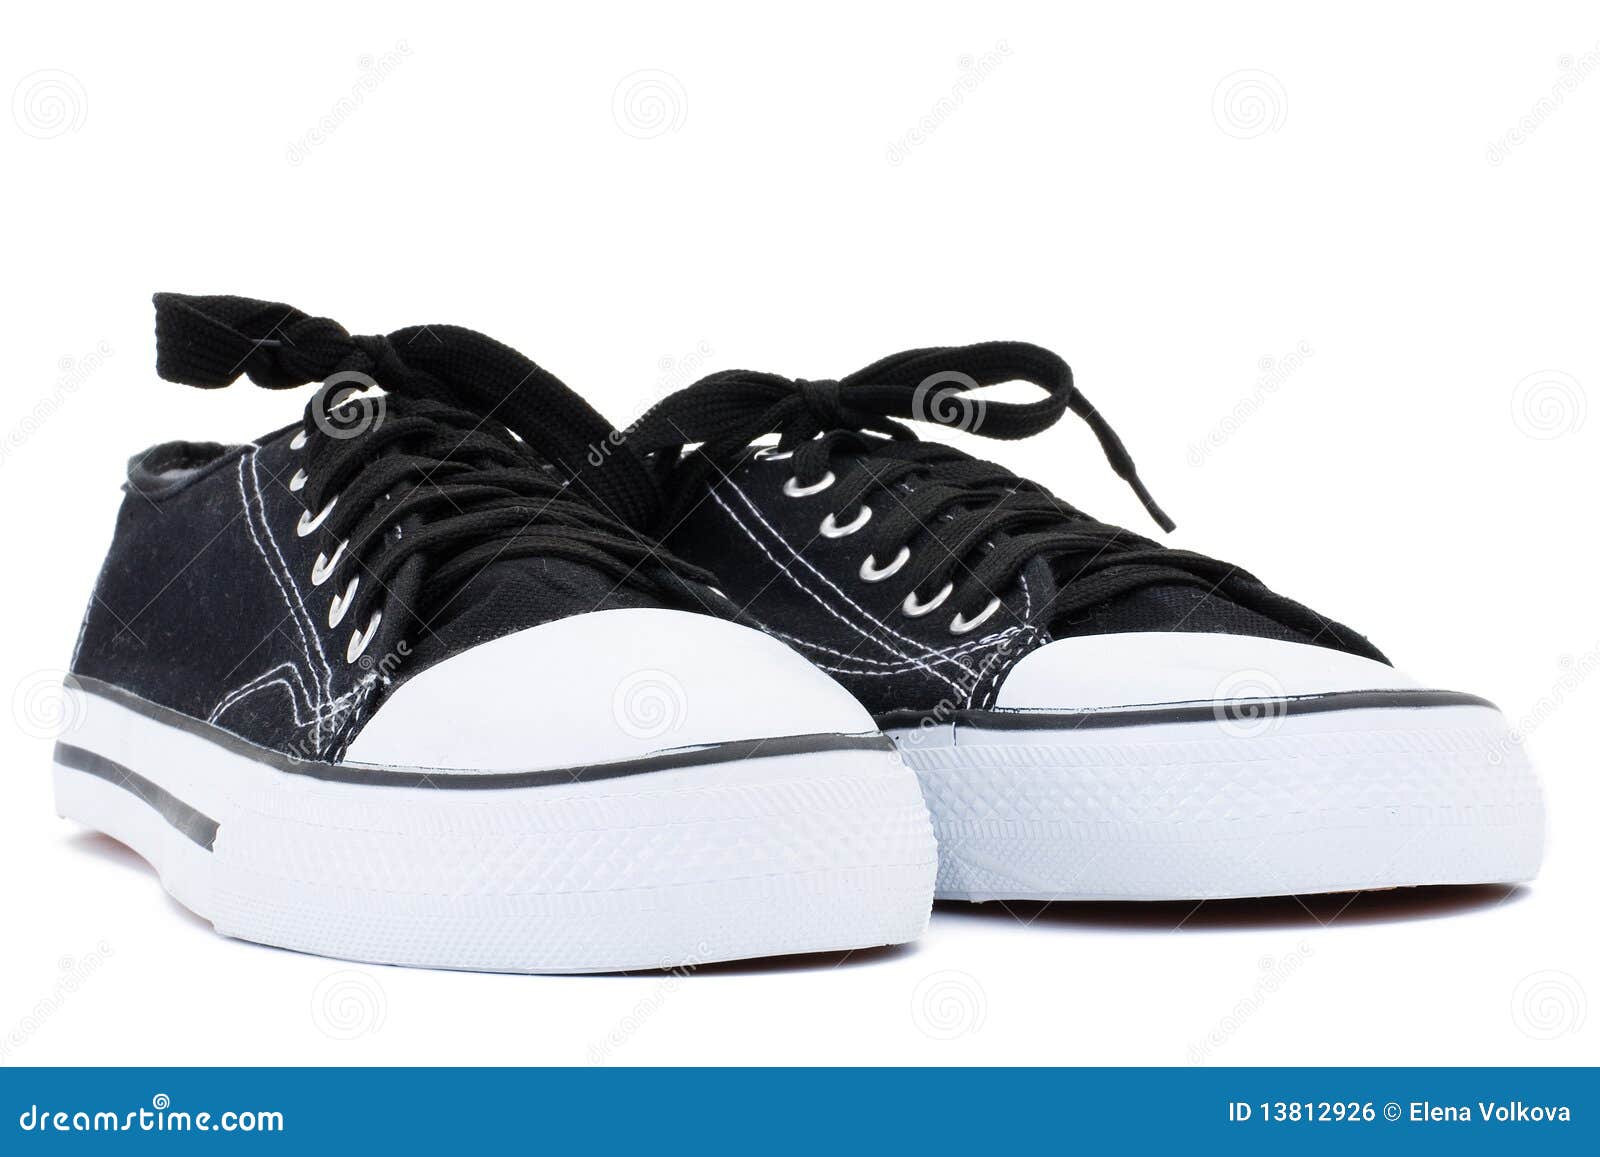 Gym Shoes Isolated on a White Background Stock Photo - Image of rubber ...